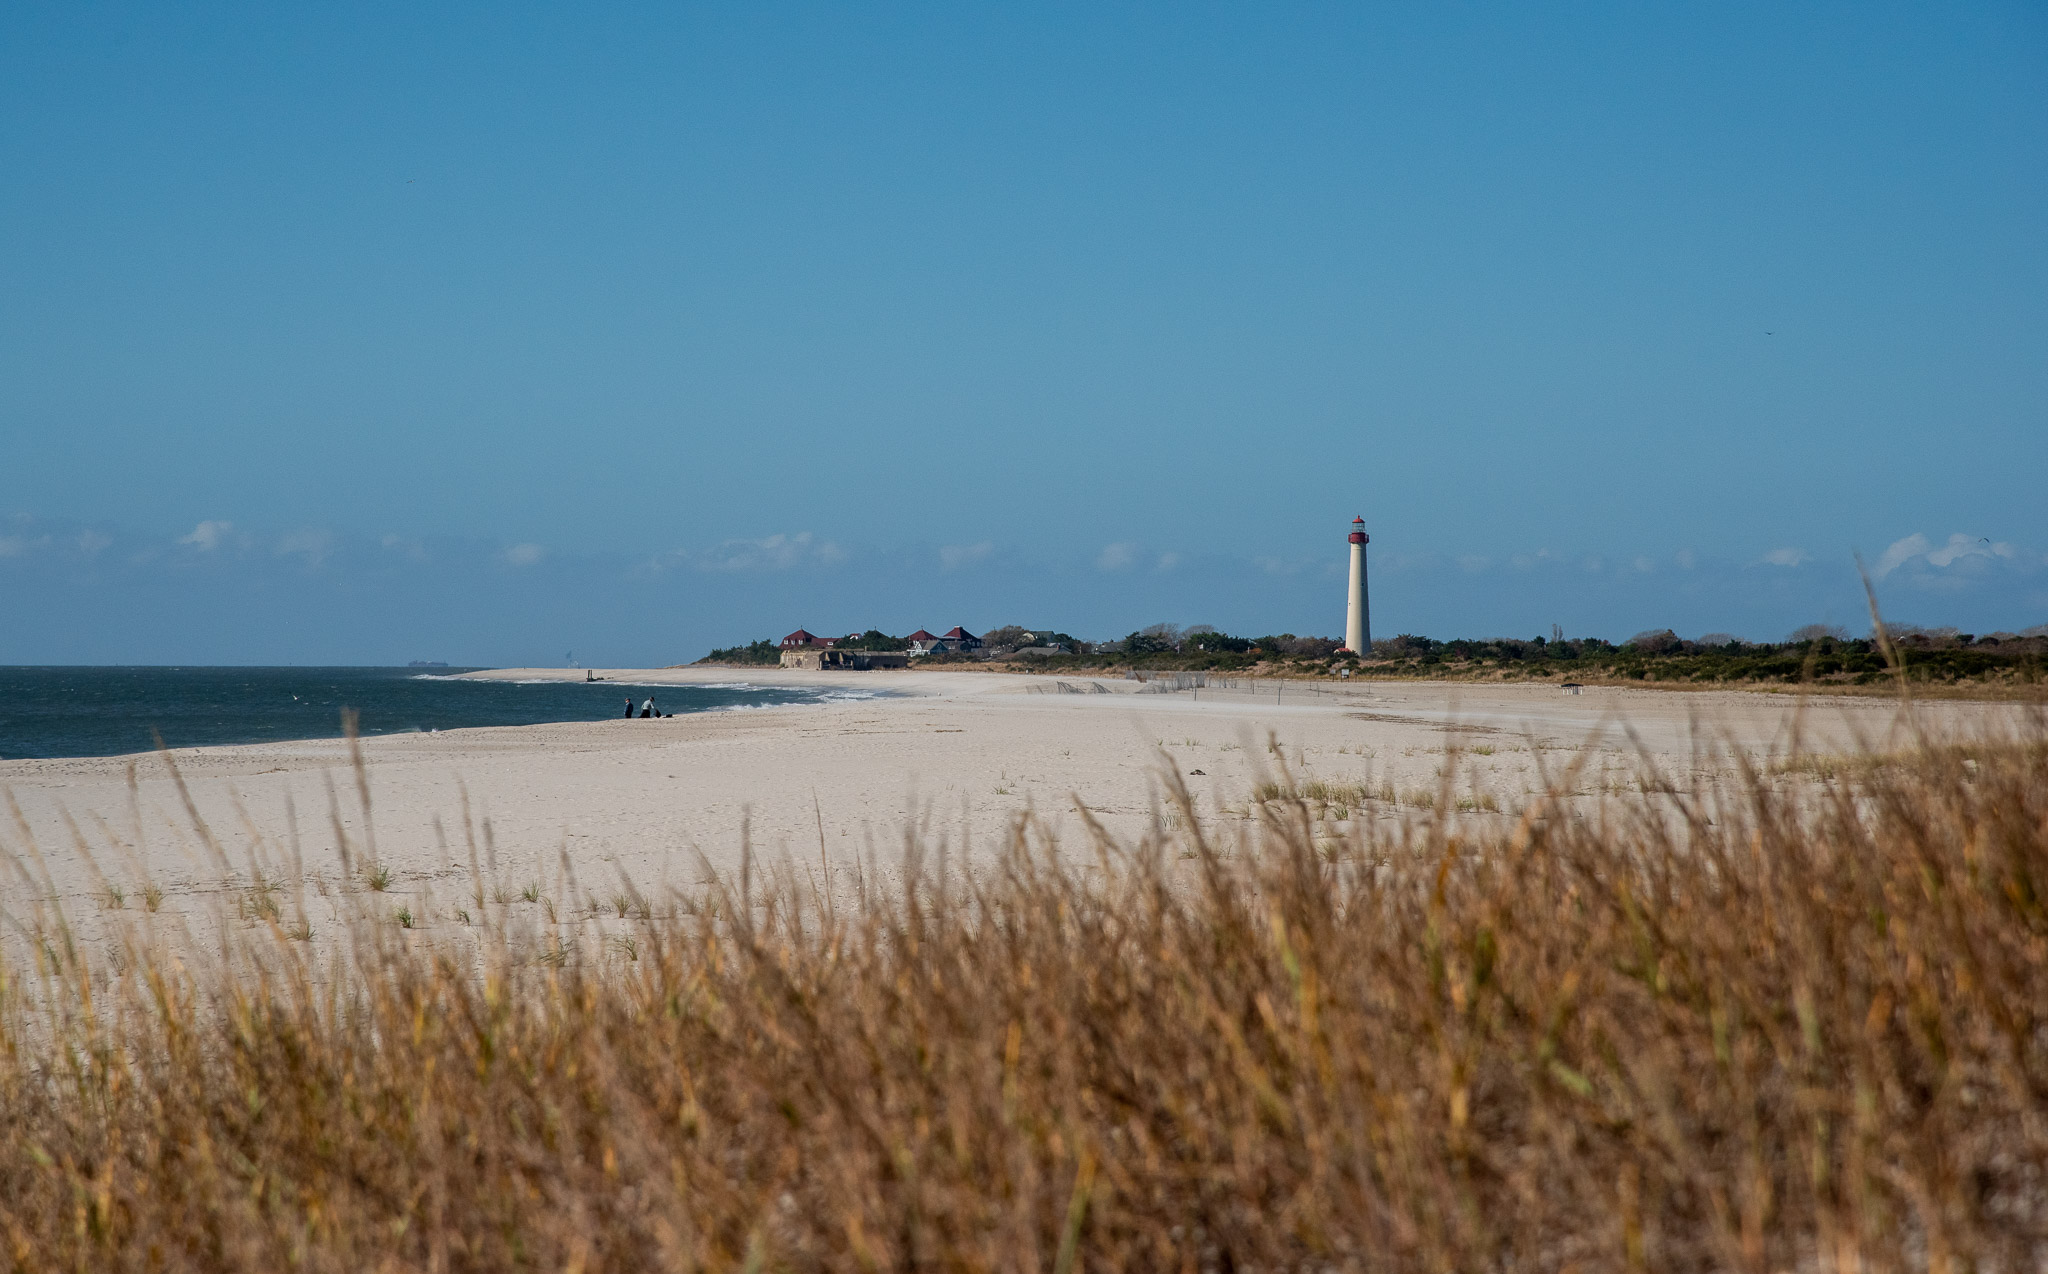 Looking Towards The Cape May Lighthouse from the dunes